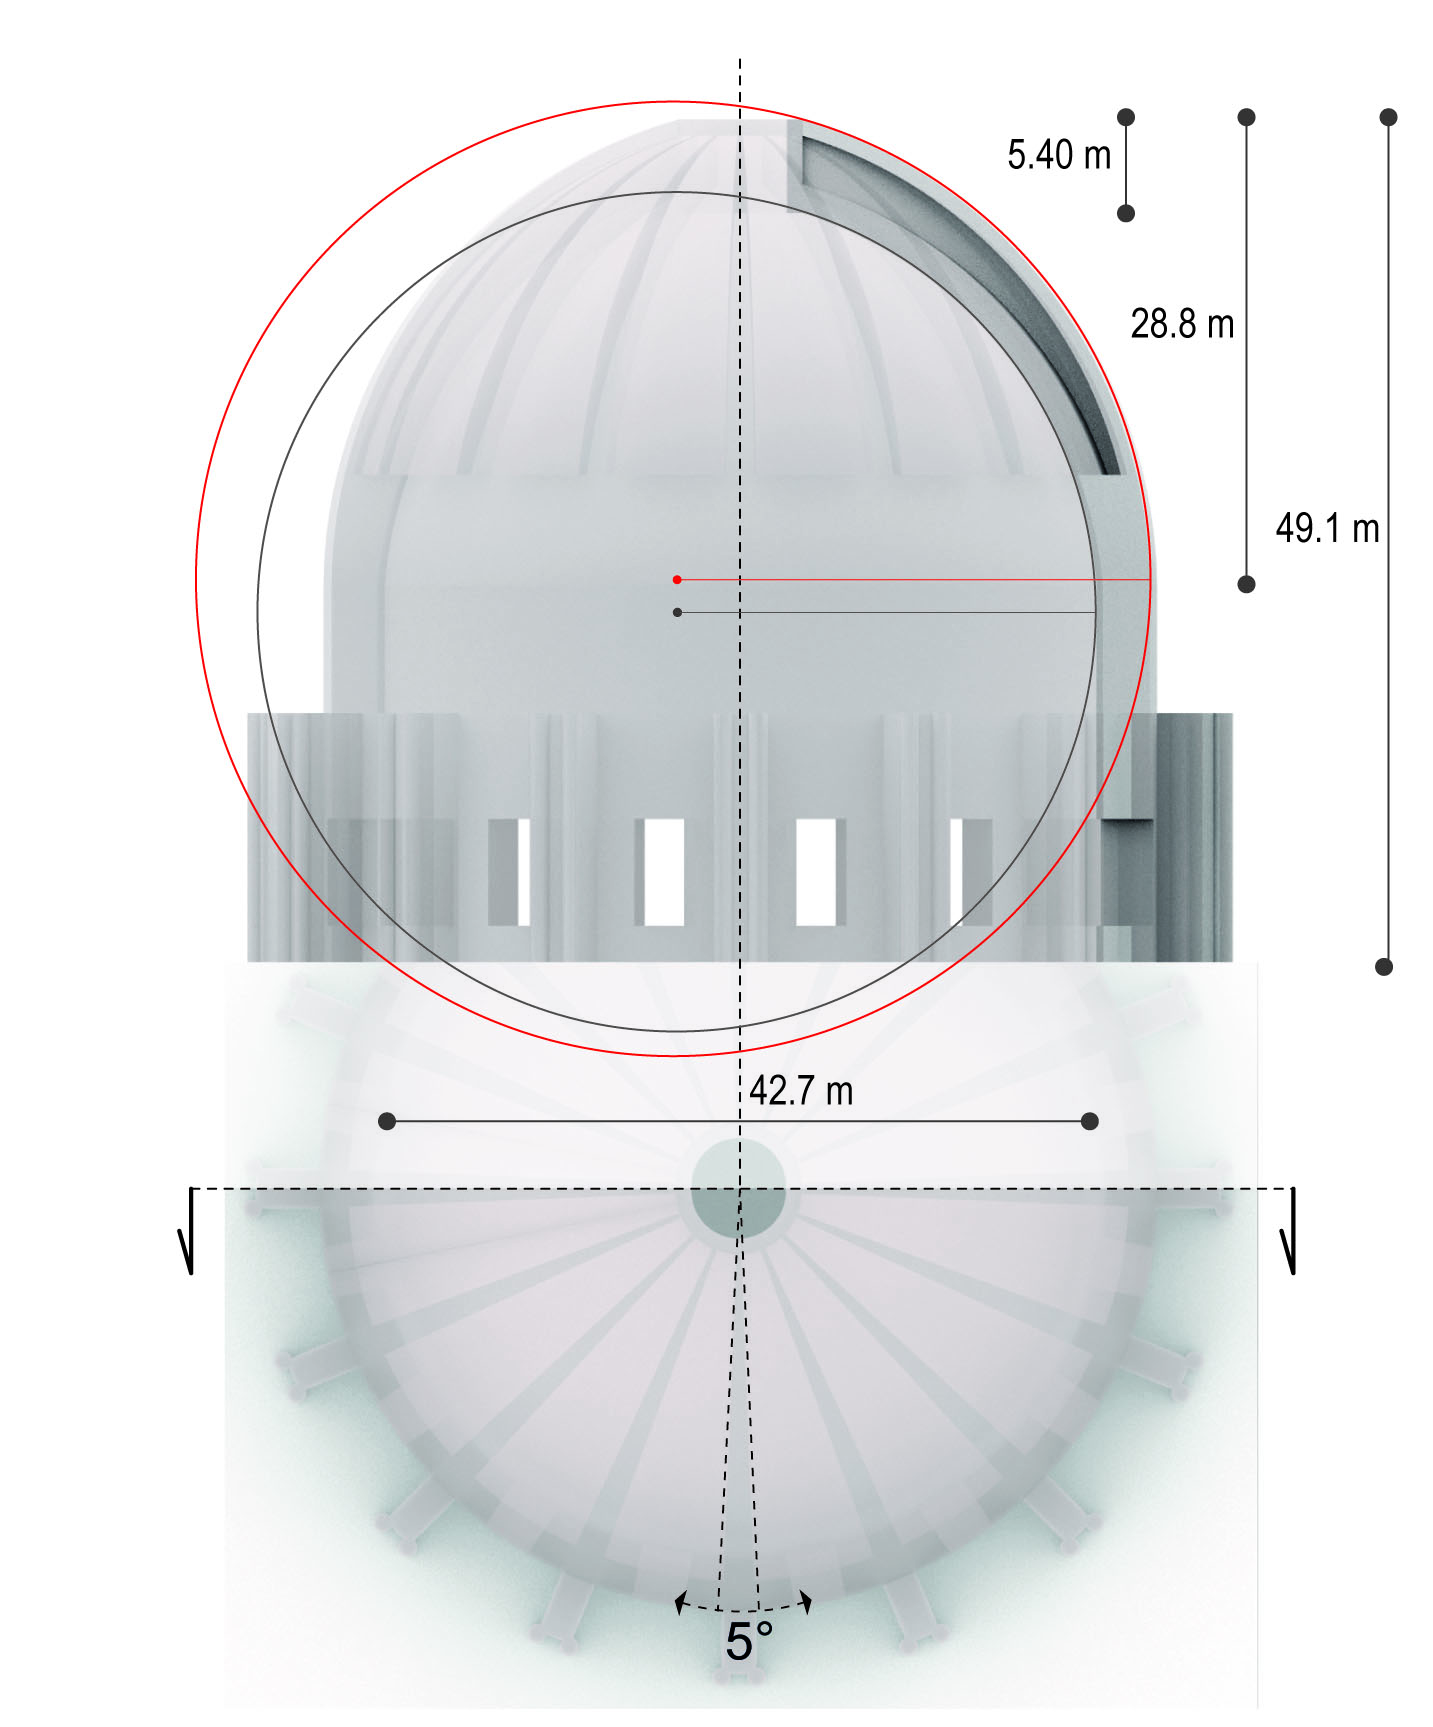 Real-time Structural Stability of Domes through Limit Analysis: Application to St. Peter’s Dome